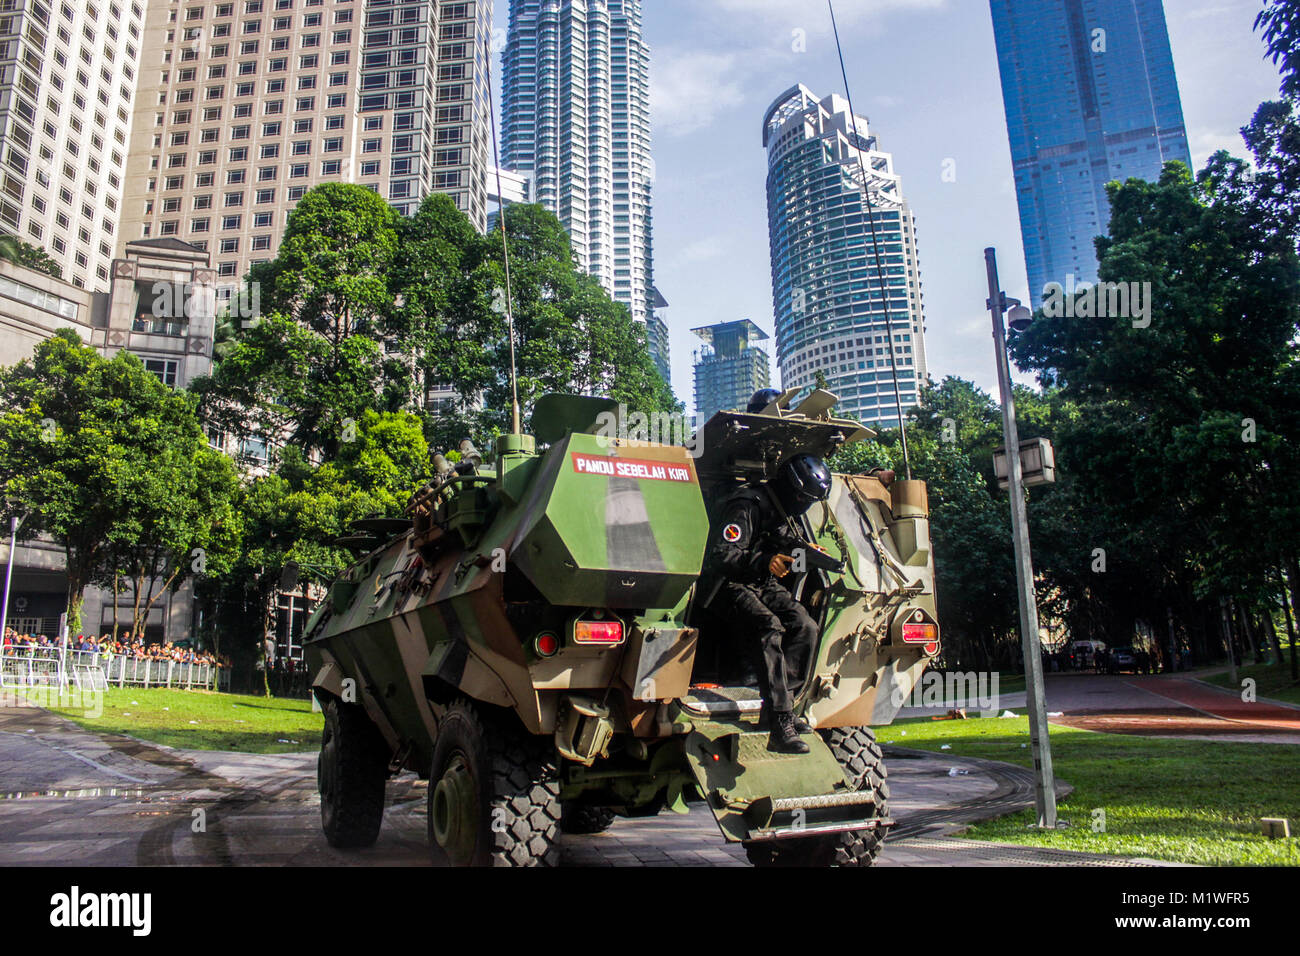 Kuala Lumpur, Malaysia. 2nd Feb, 2018. Malaysia Royal Police from Special task force unit during preparation of Anti-Terrorism charity exercise in conjuntion with the ninth World Urban Forum (WUF9) in Kuala Lumpur on February 2, 2018. More than 400 security force take a part include firefighters exercise for World Urban Forum next week. Credit: Samsul Said/AFLO/Alamy Live News Stock Photo